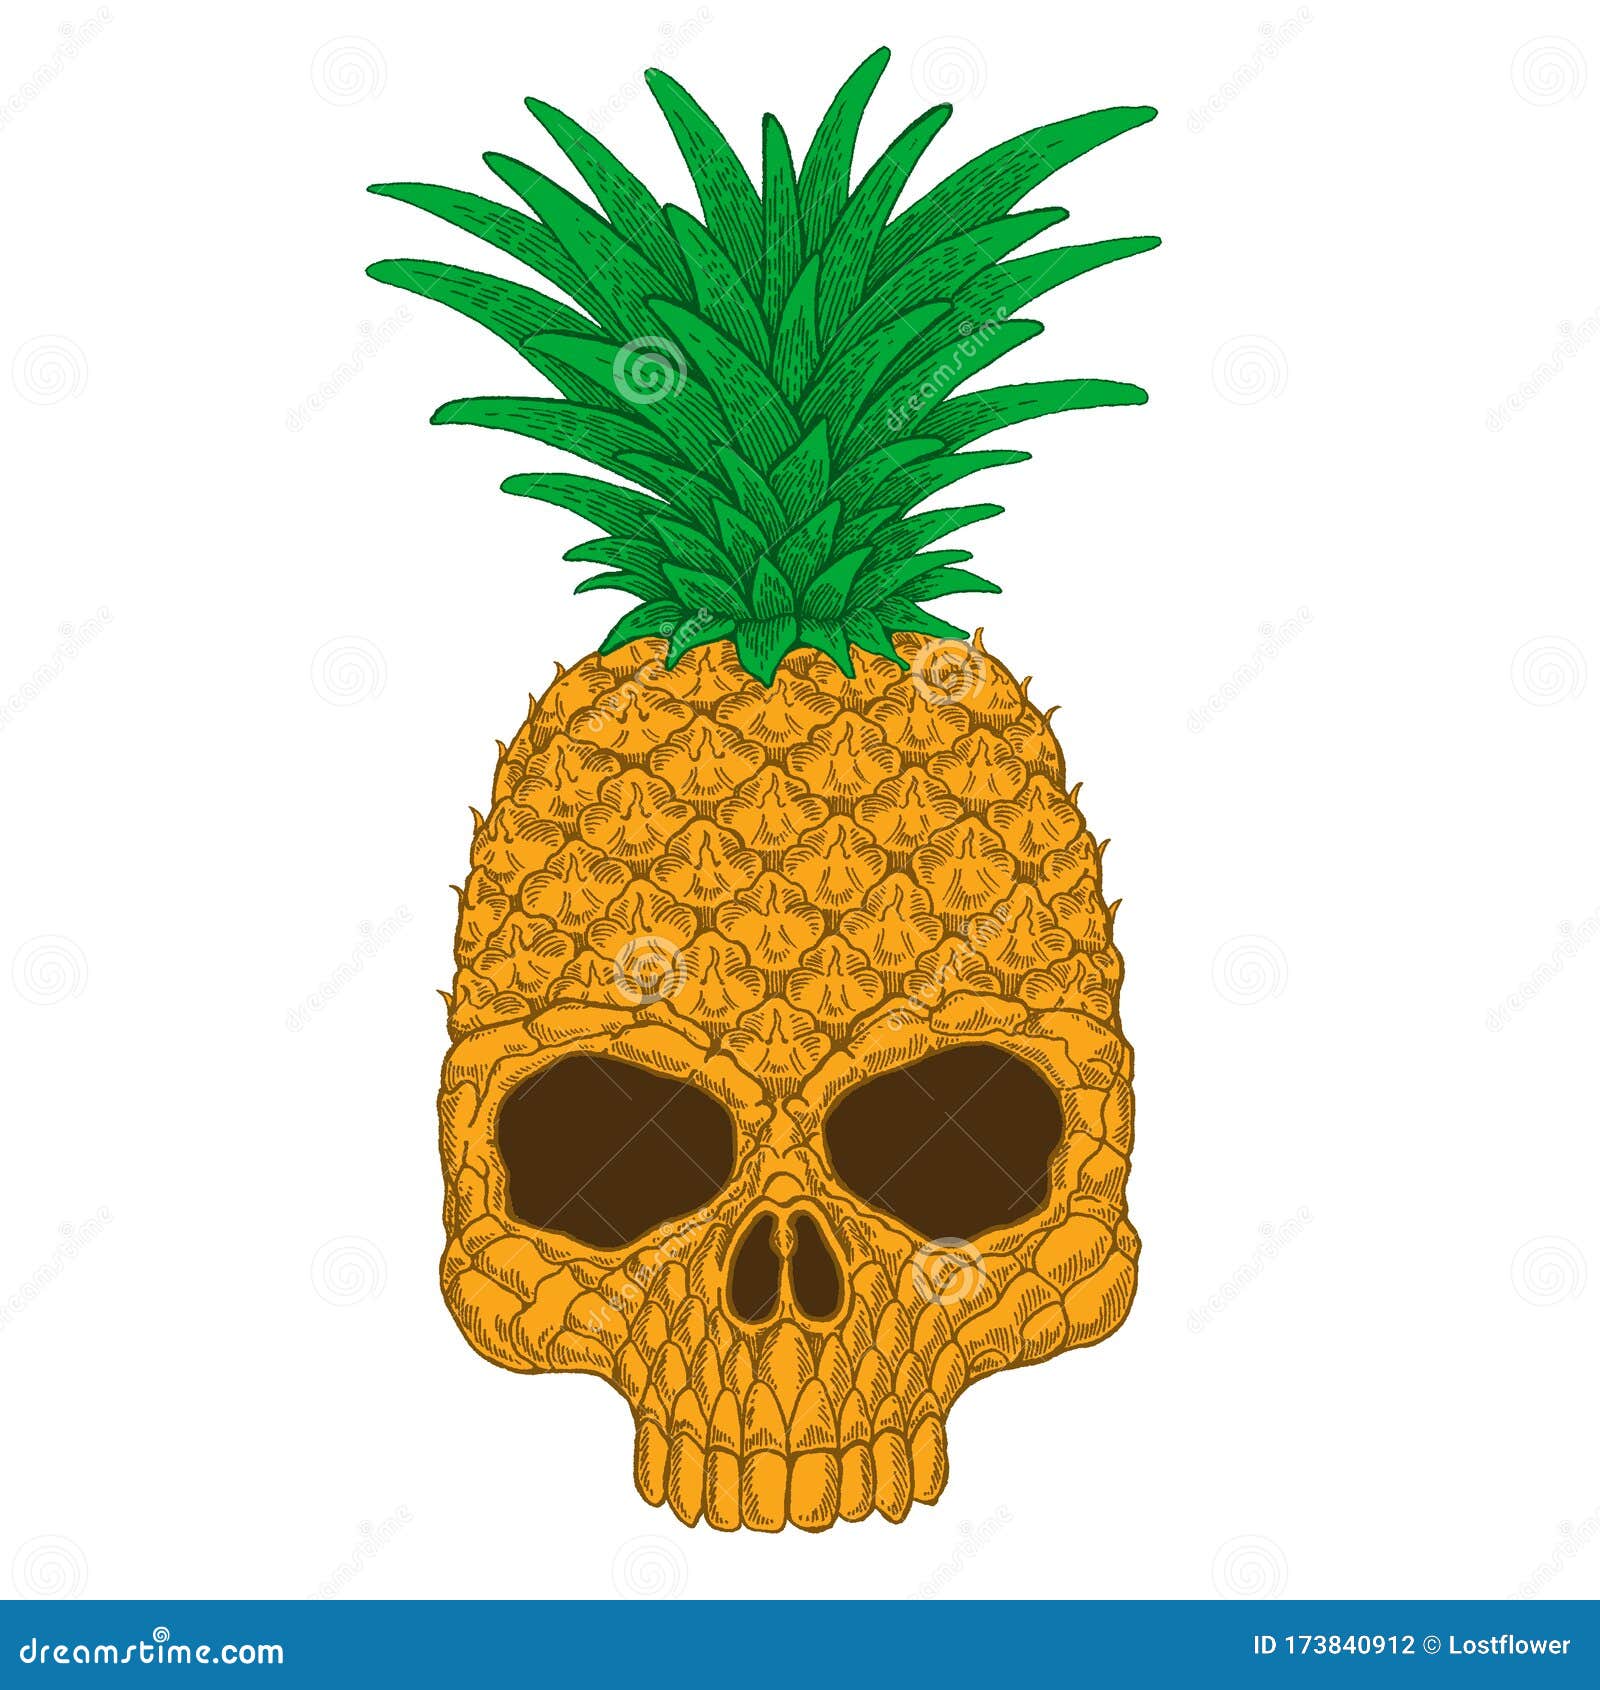 Pineapple skull by Lukas at Lady Luck Tattoo im Hawaii  rtattoos